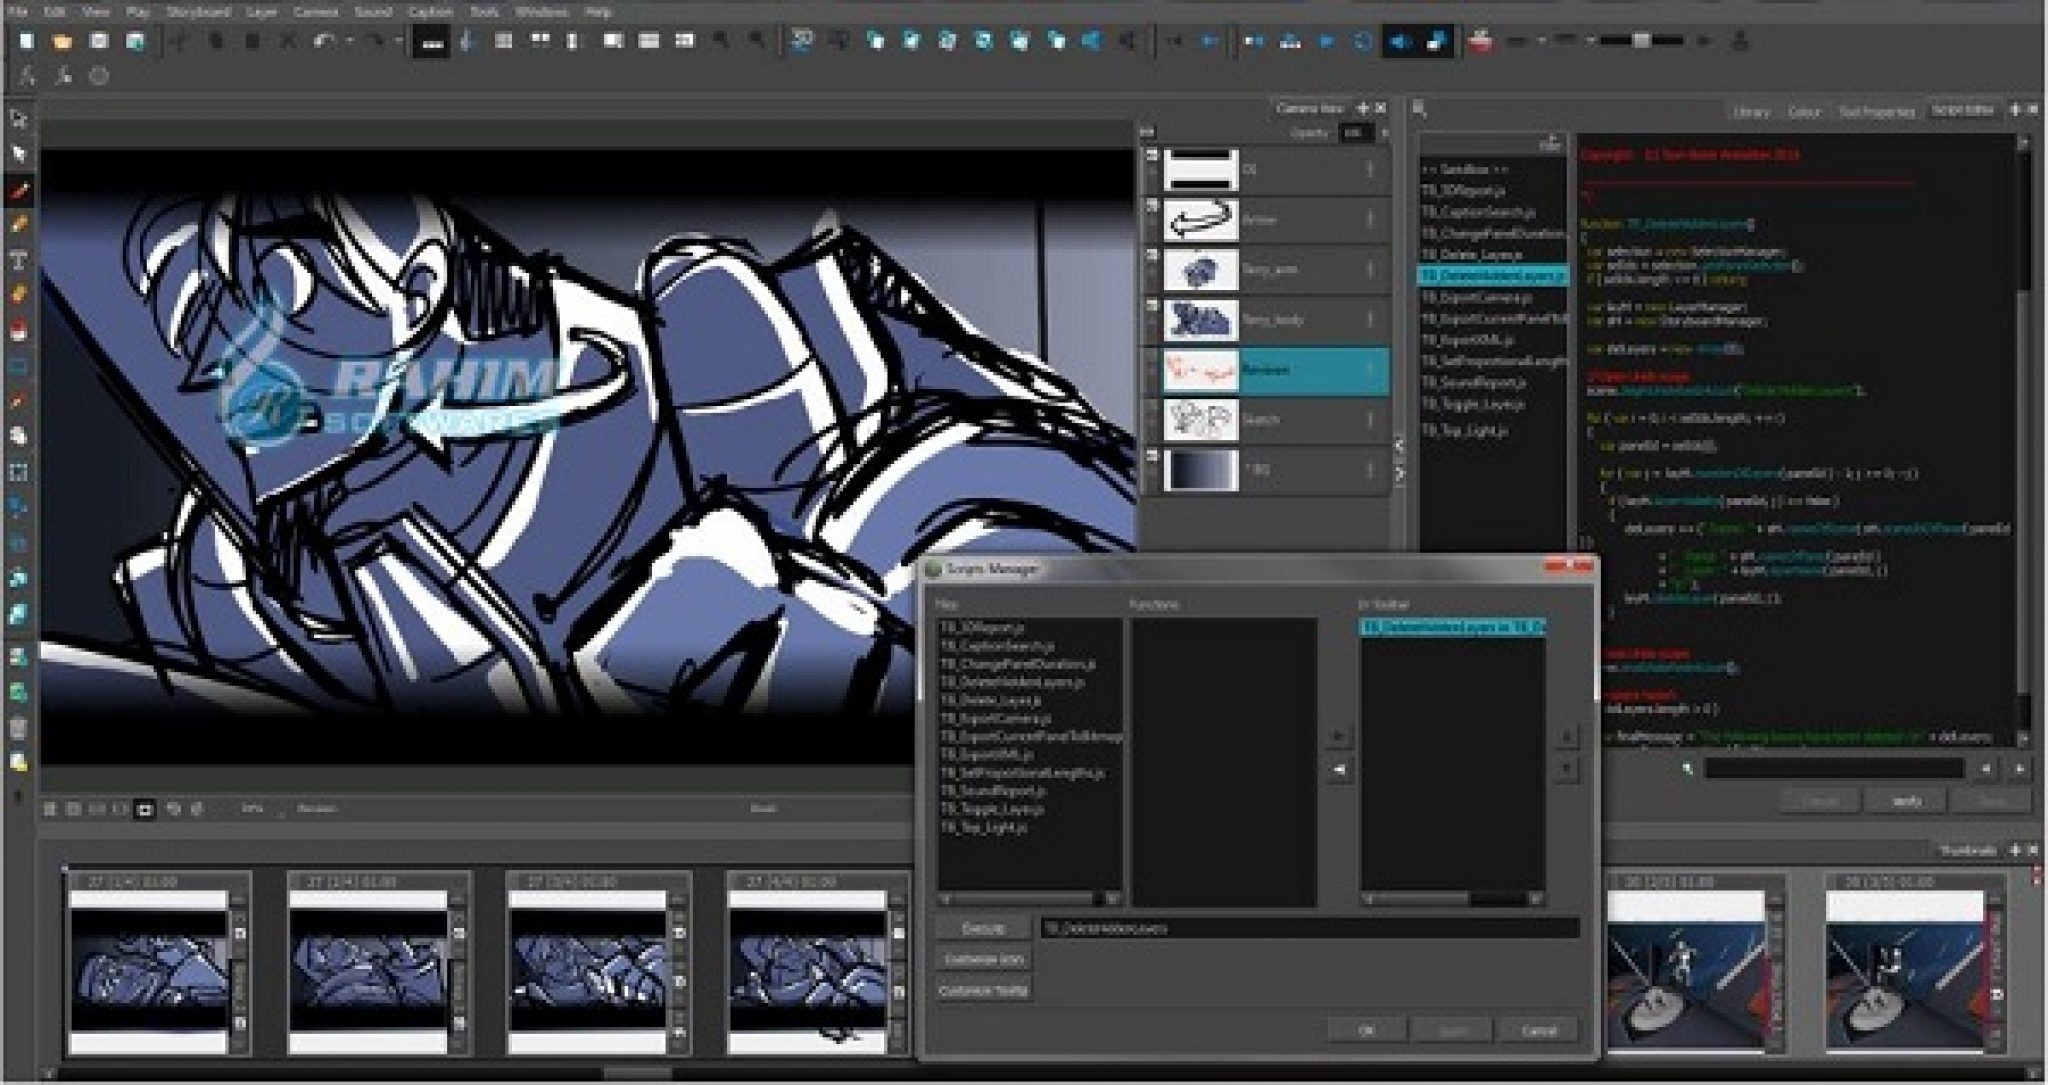 storyboard pro software free download